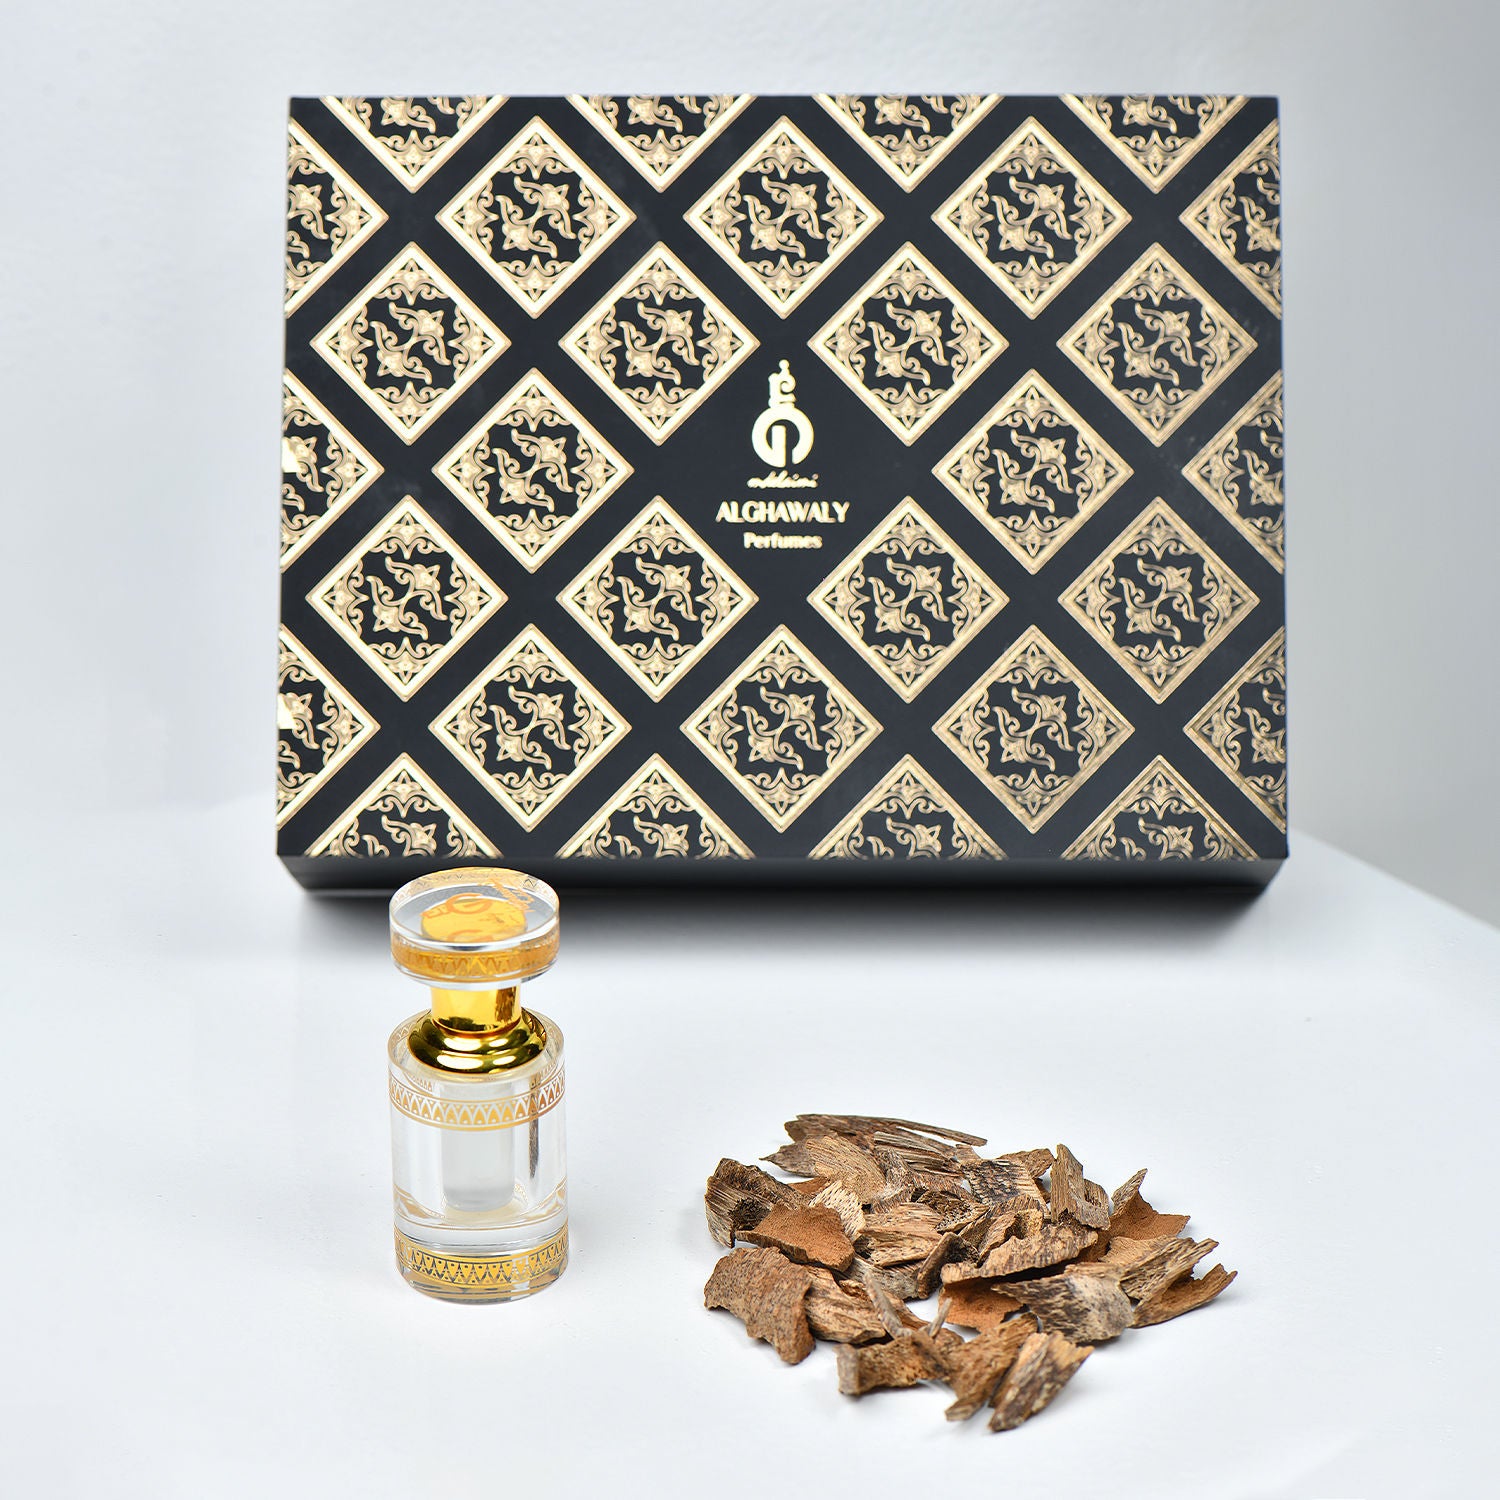 Alghawaly Oud Box and Bouquet Combo